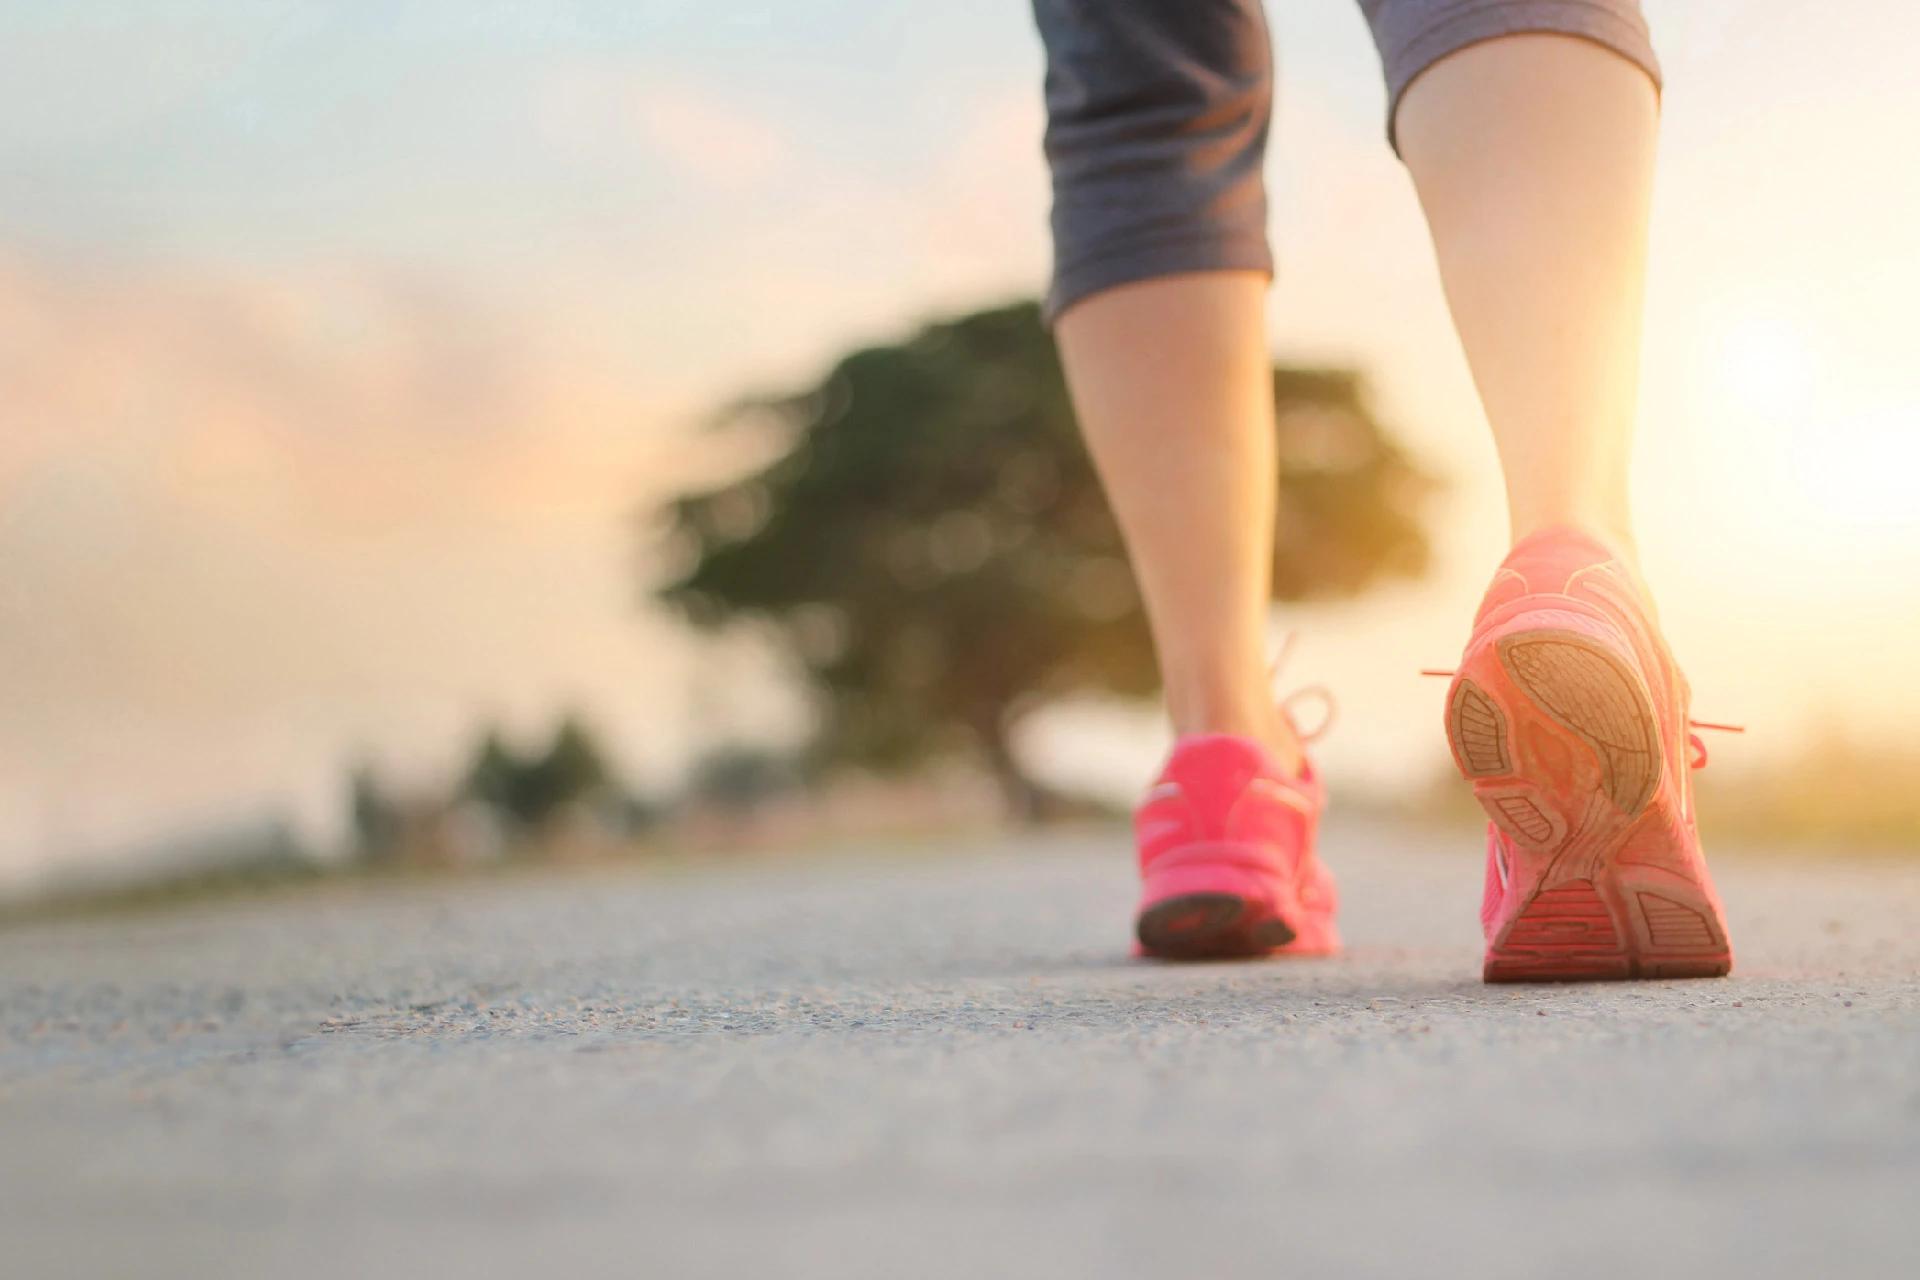 How to Make the Most of Your Walk: 7 Top Tips